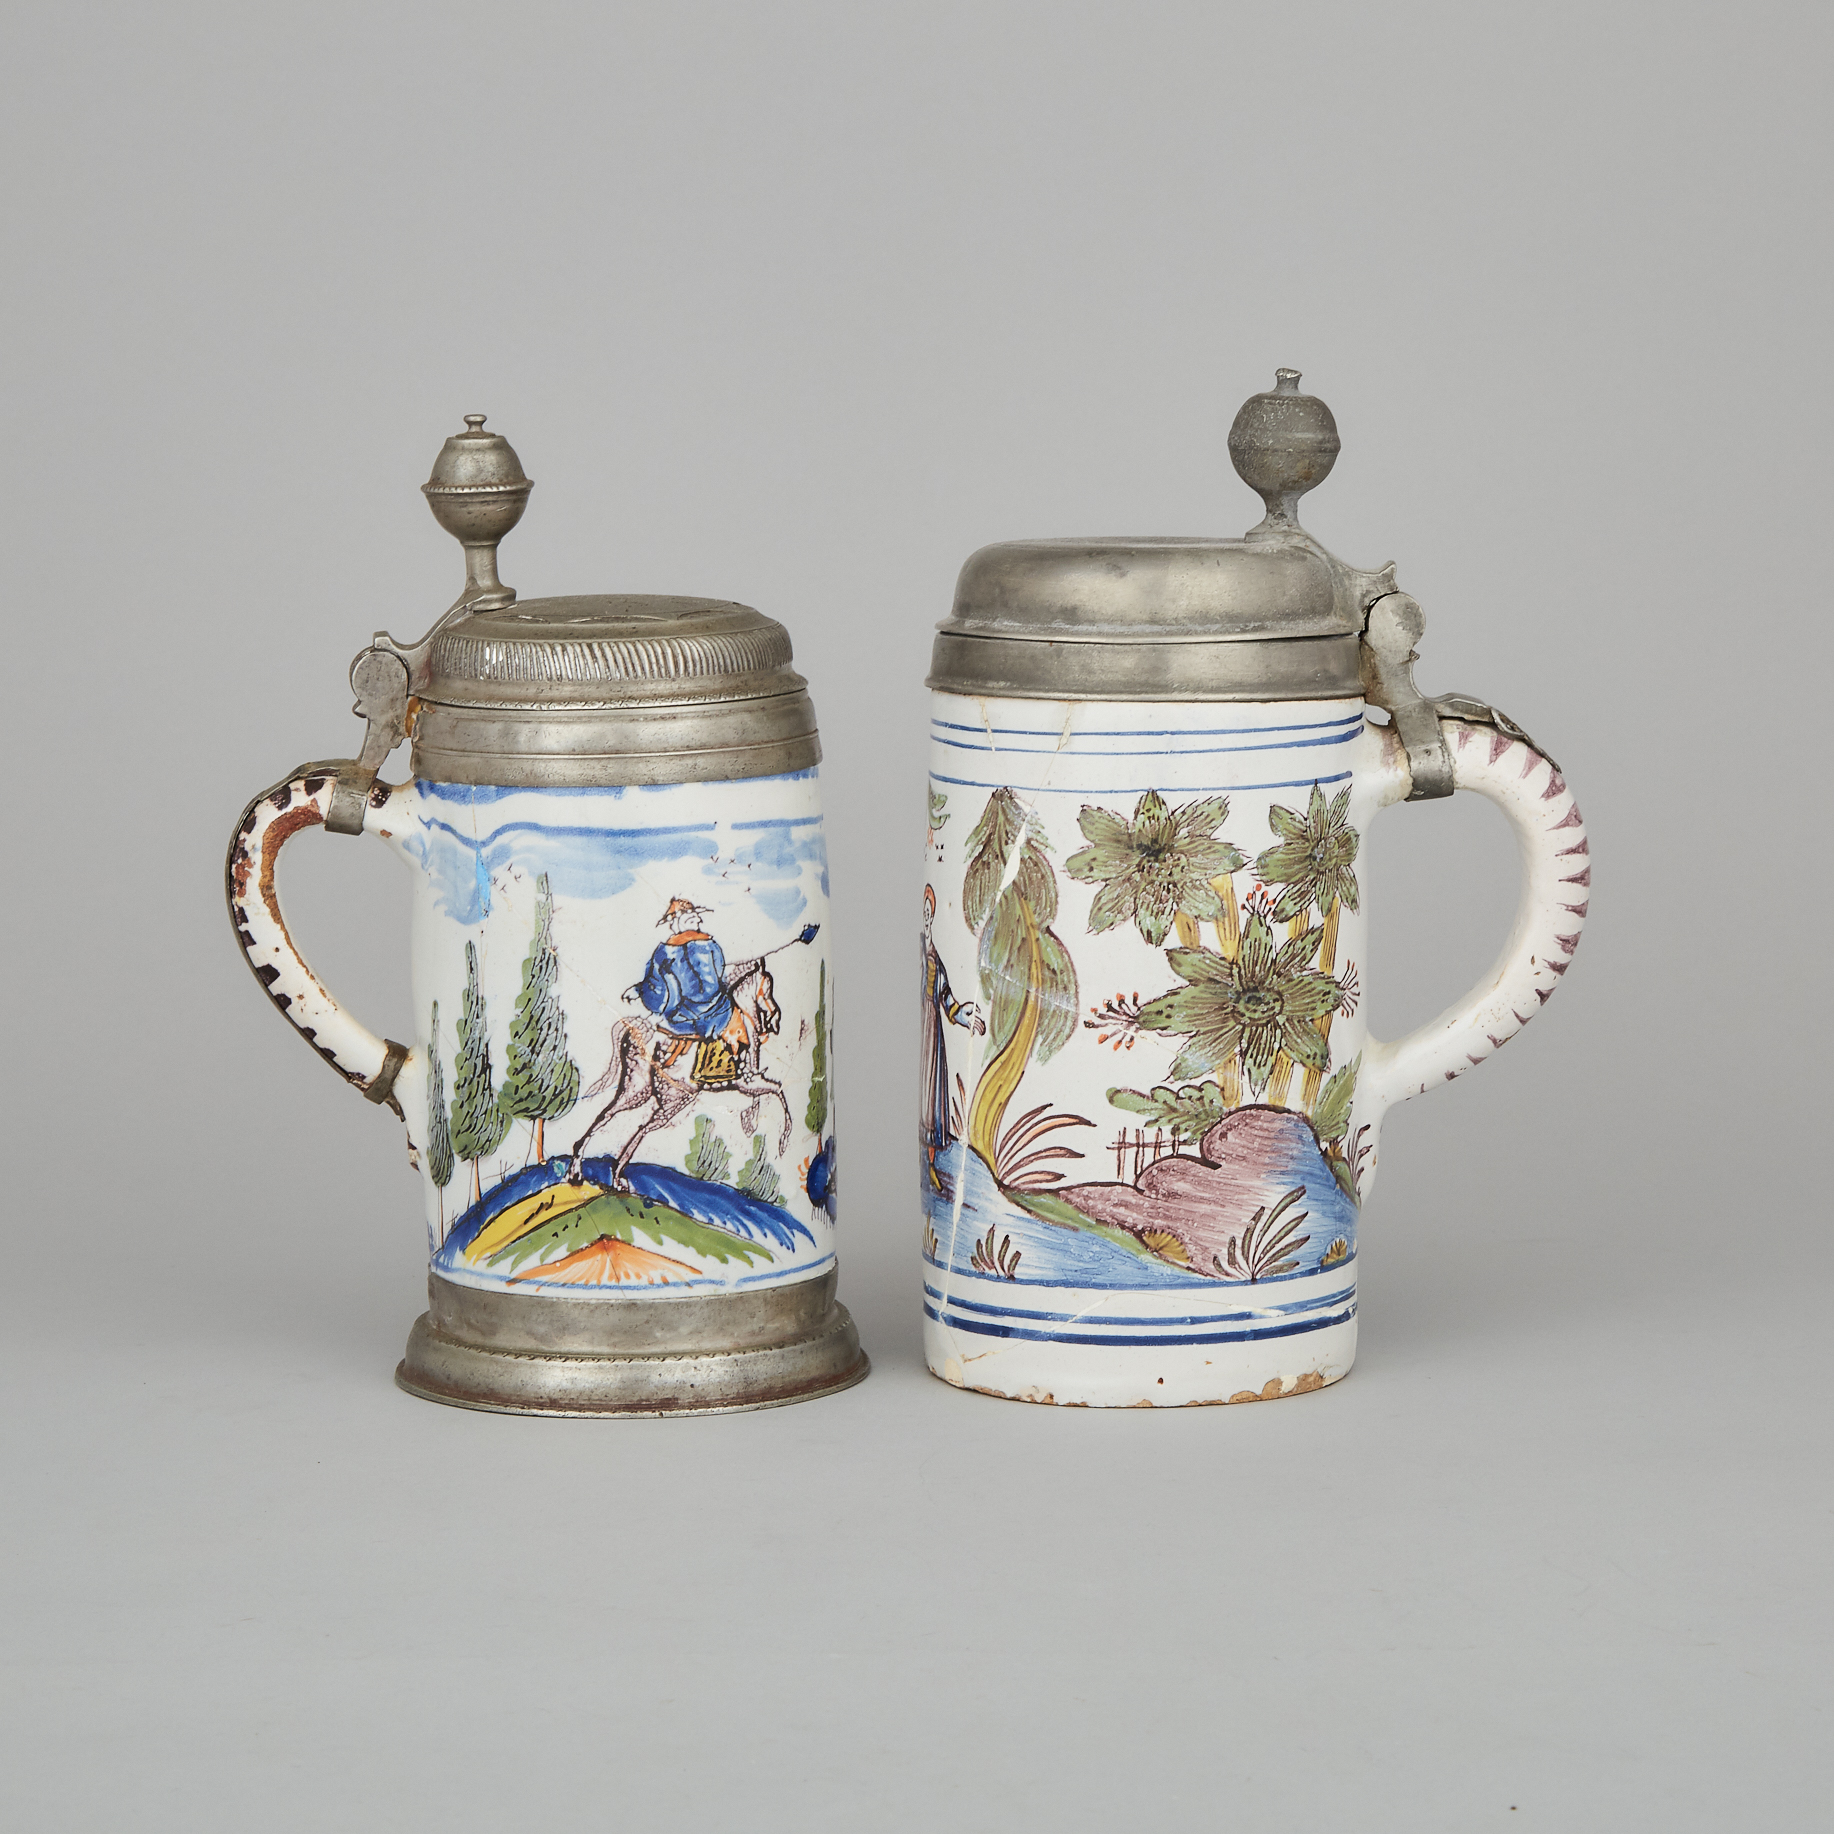 Two German Pewter Mounted Faience Steins, c.1748 and 1768